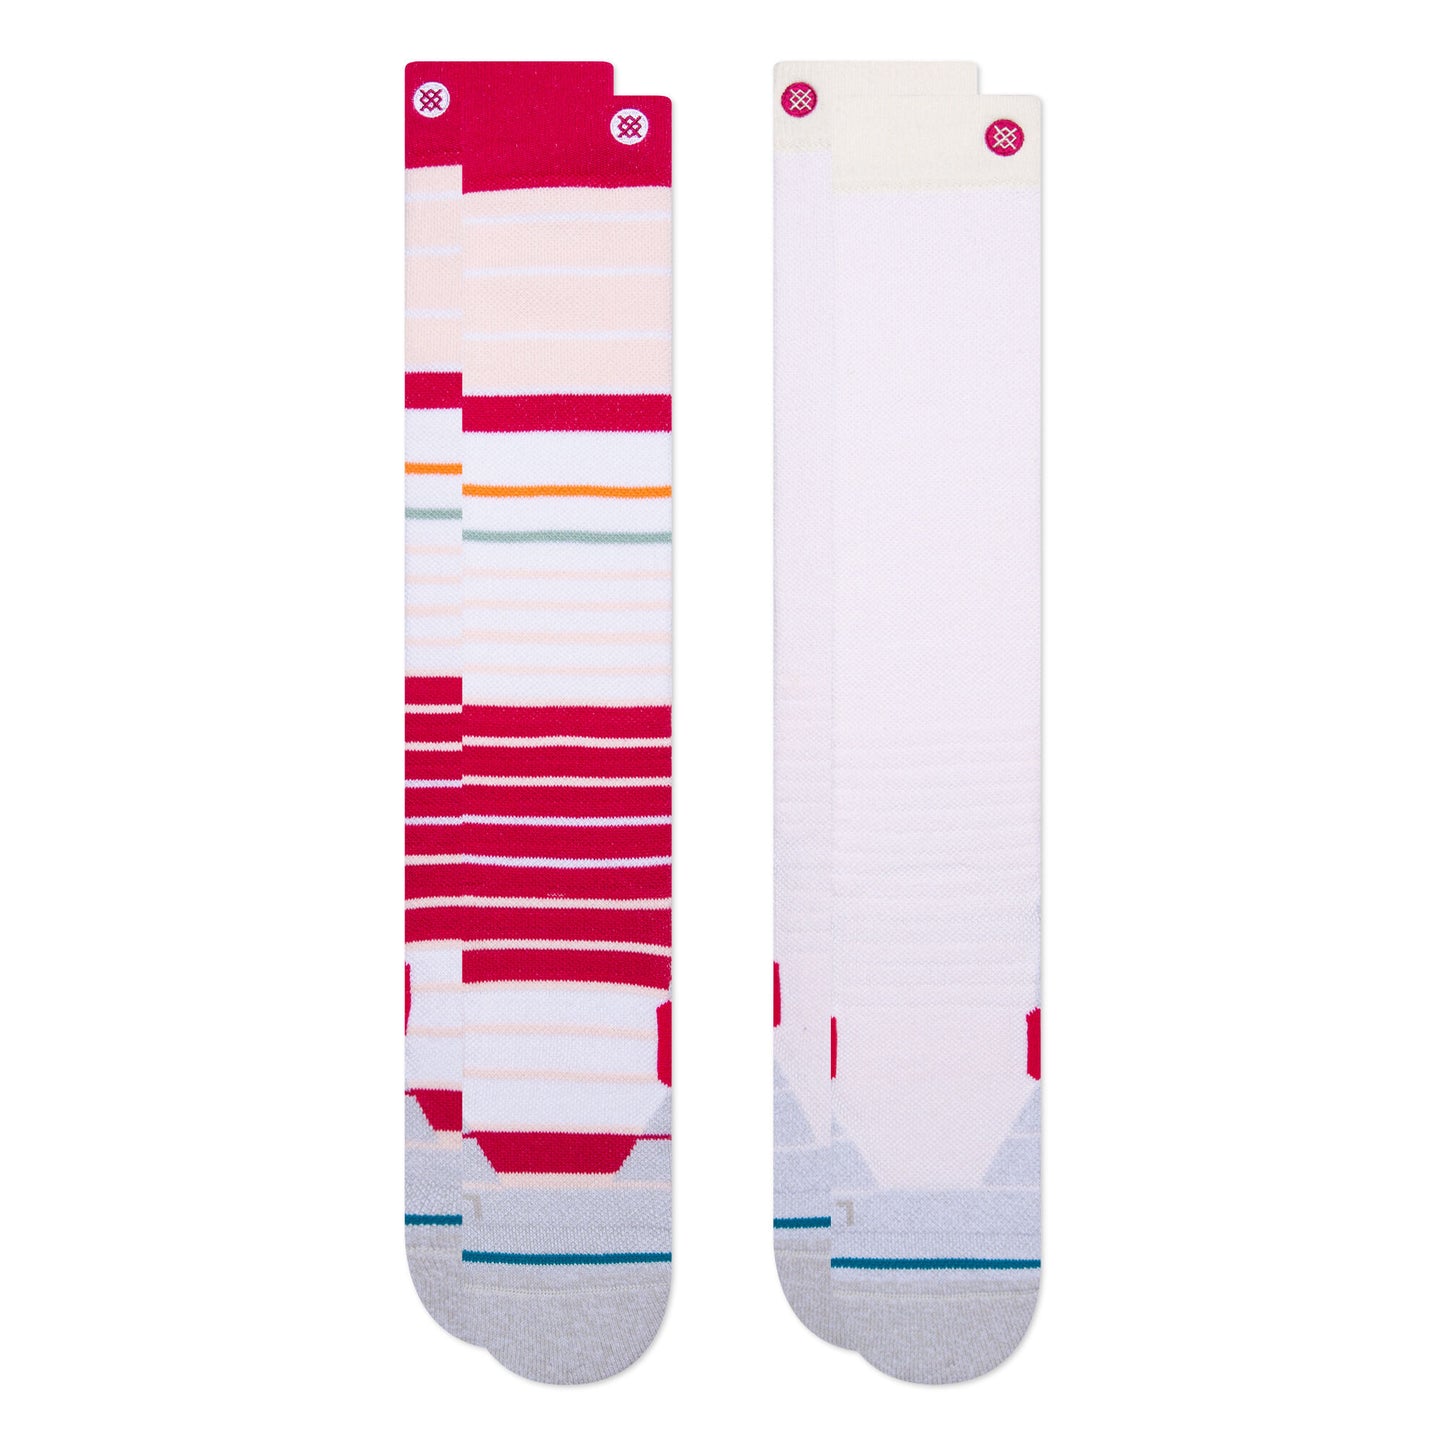 STANCE PINKY PROMISE SNOW SOCK 2 PACK